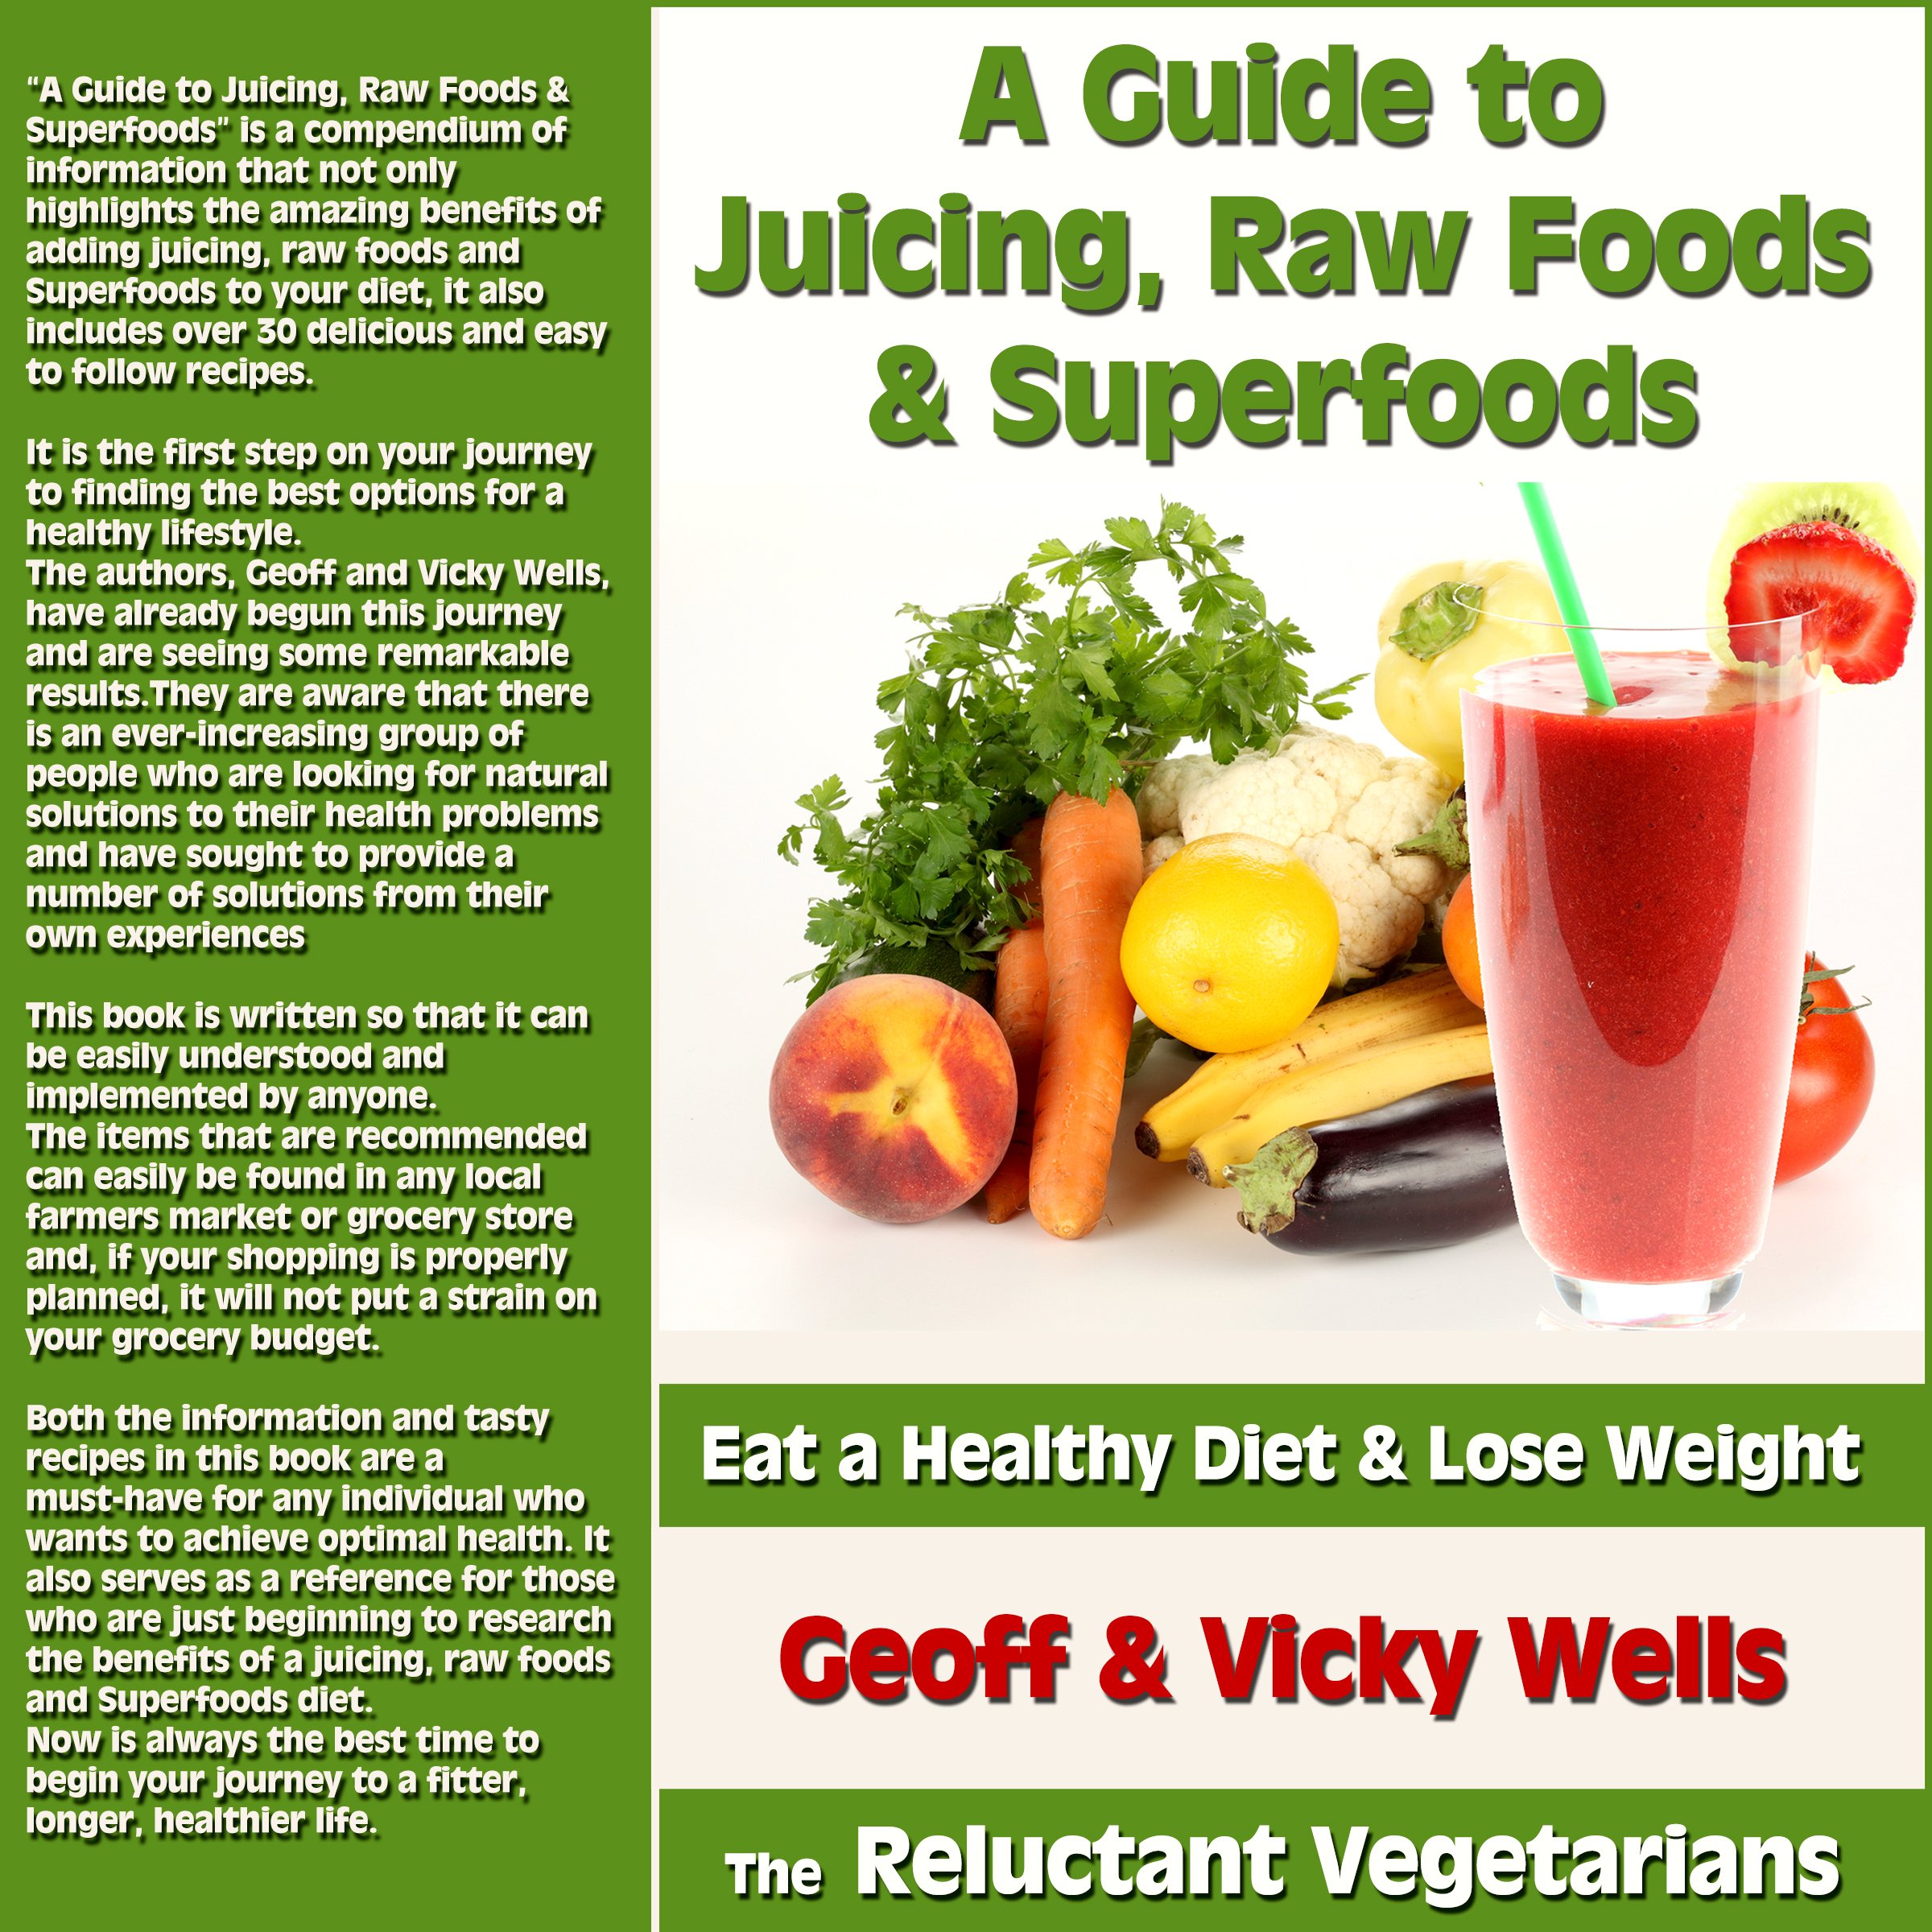 A Guide to Juicing, Raw Foods & Superfoods: Eat a Healthy Diet & Lose Weight - The Reluctant Vegetarians